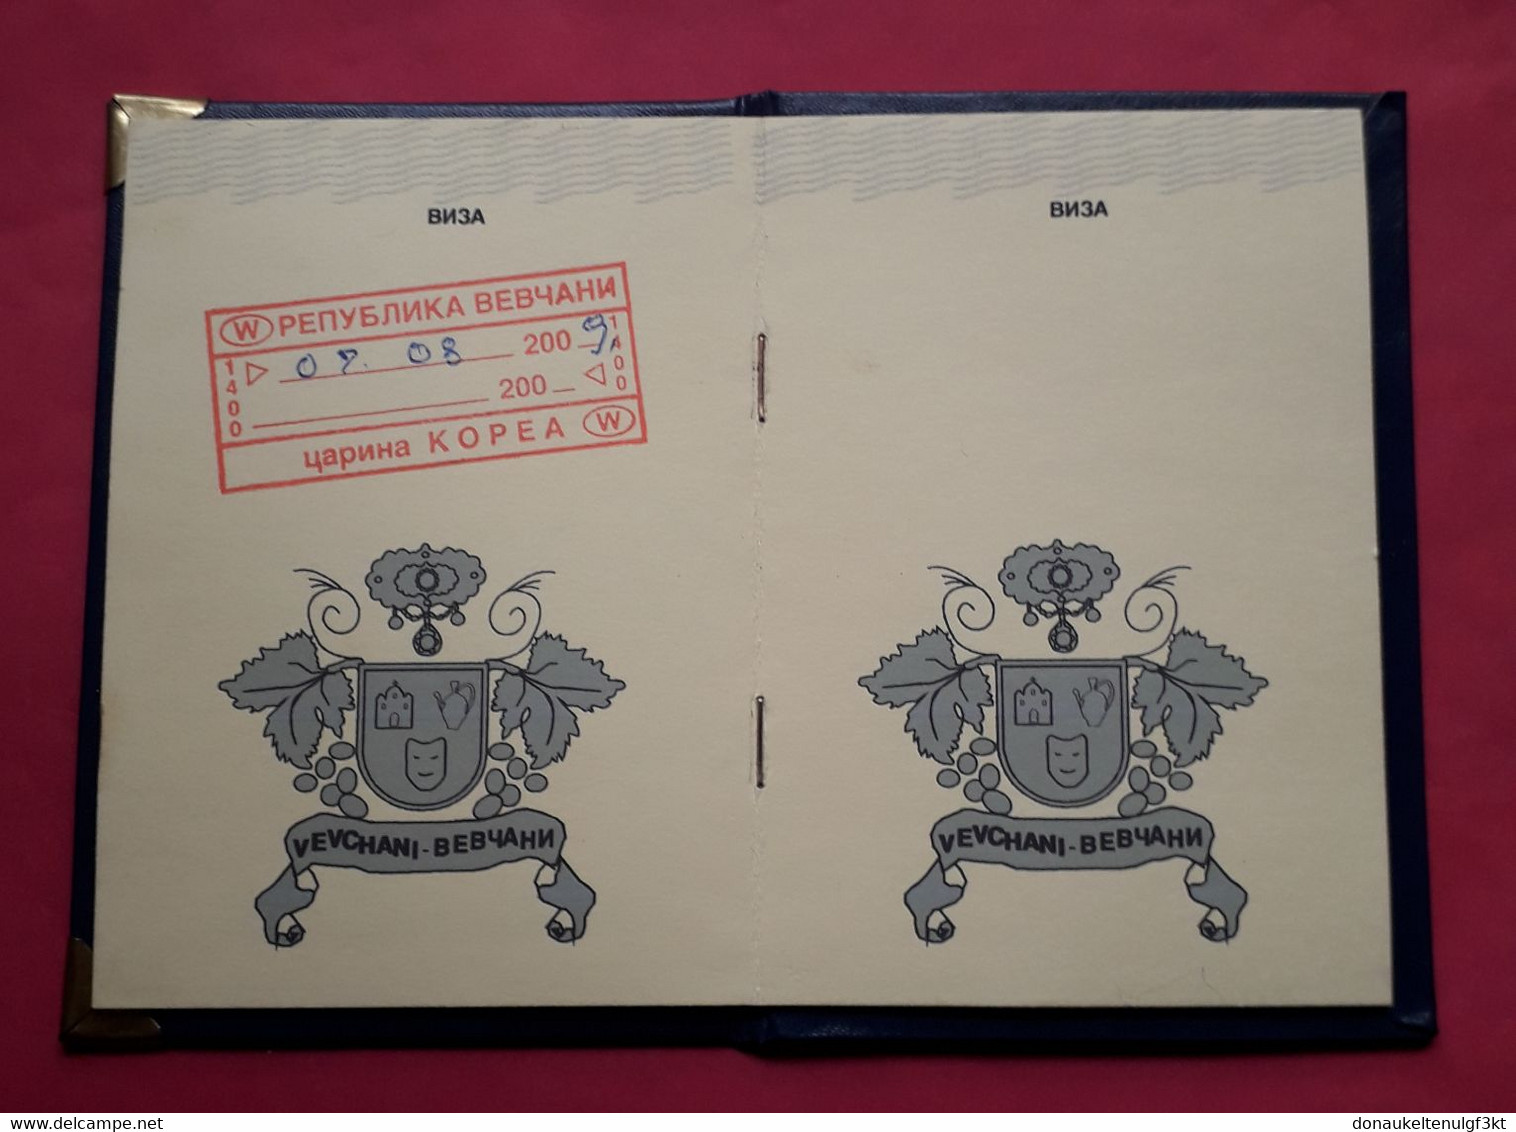 Republic Of VEVCHANI (Macedonia), Passport, Used Only For Entering Carnival In Vevchani, UNIQUE - Documentos Históricos